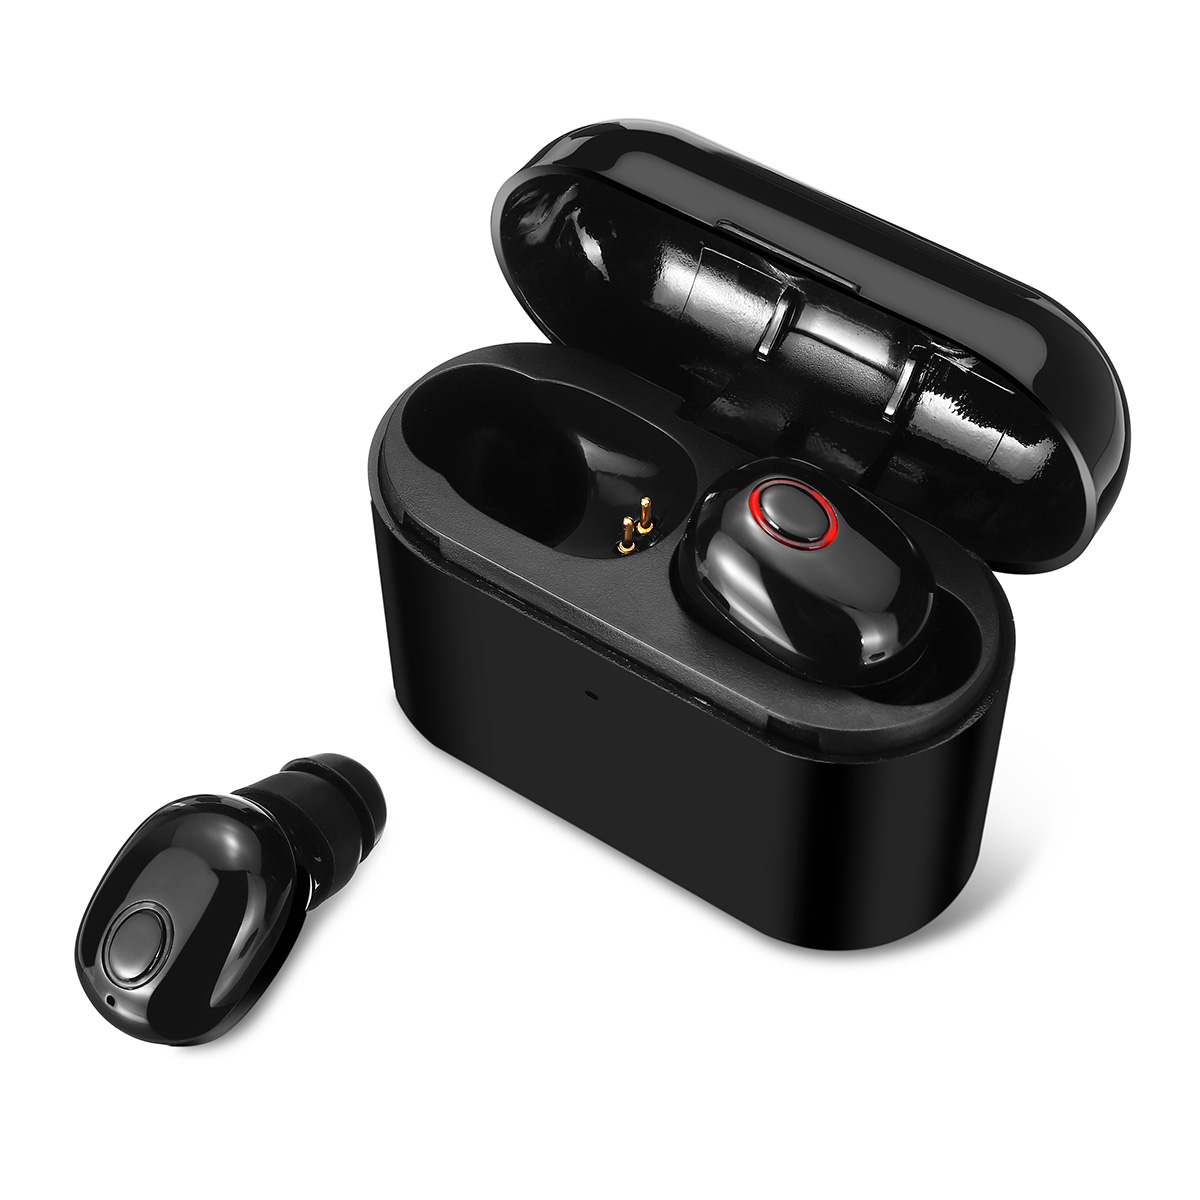 

[bluetooth 5.0] Portable TWS True Wireless Earphone Mini Noise Cancelling Stereo Sport Headphone with Charging Box